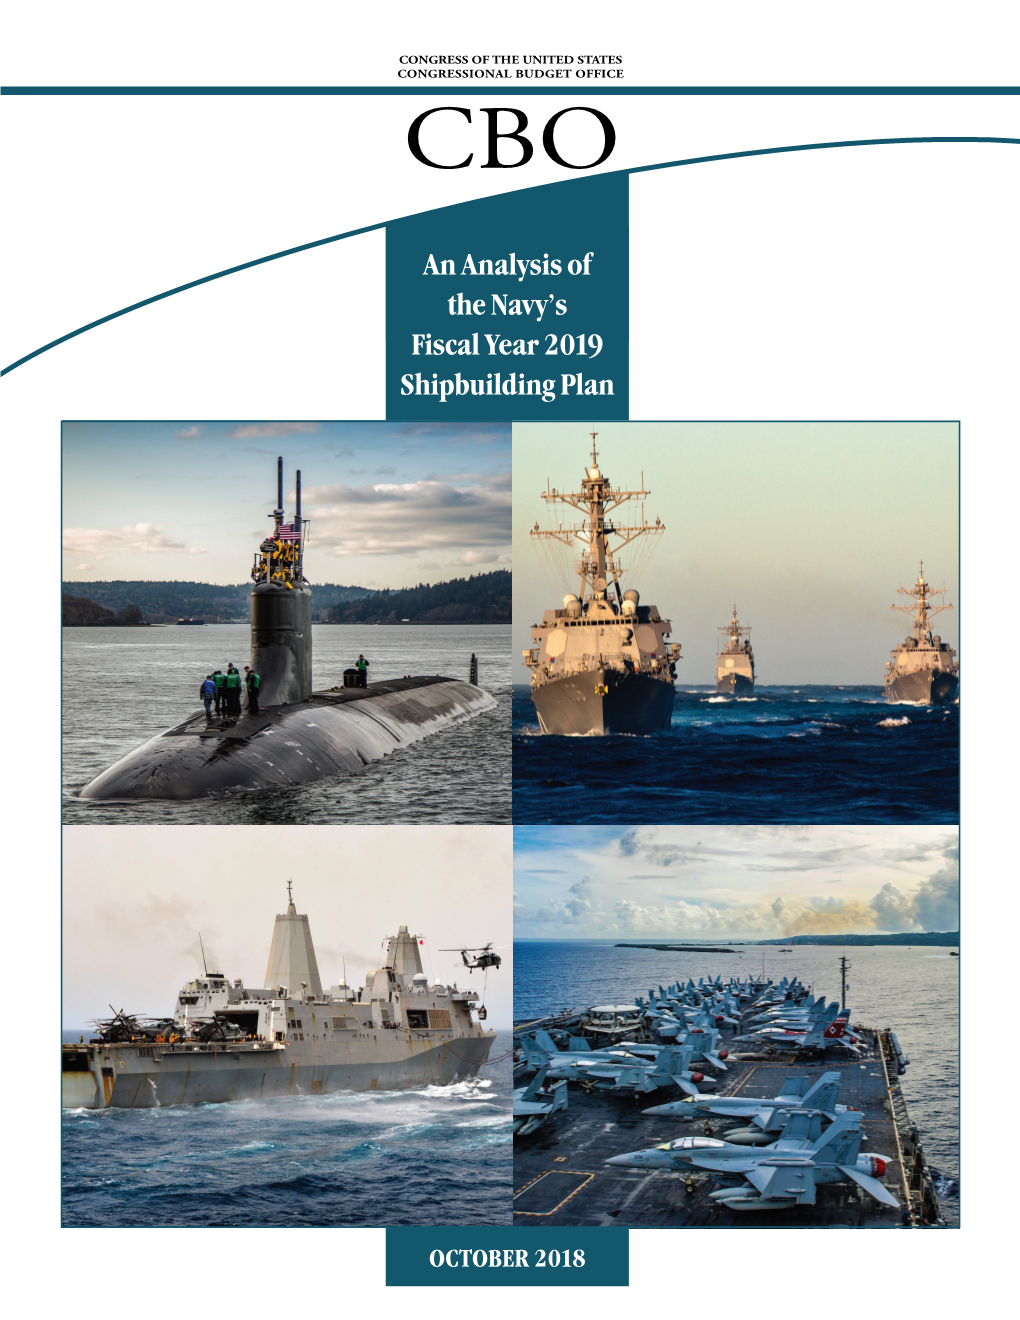 An Analysis of the Navy's Fiscal Year 2019 Shipbuilding Plan